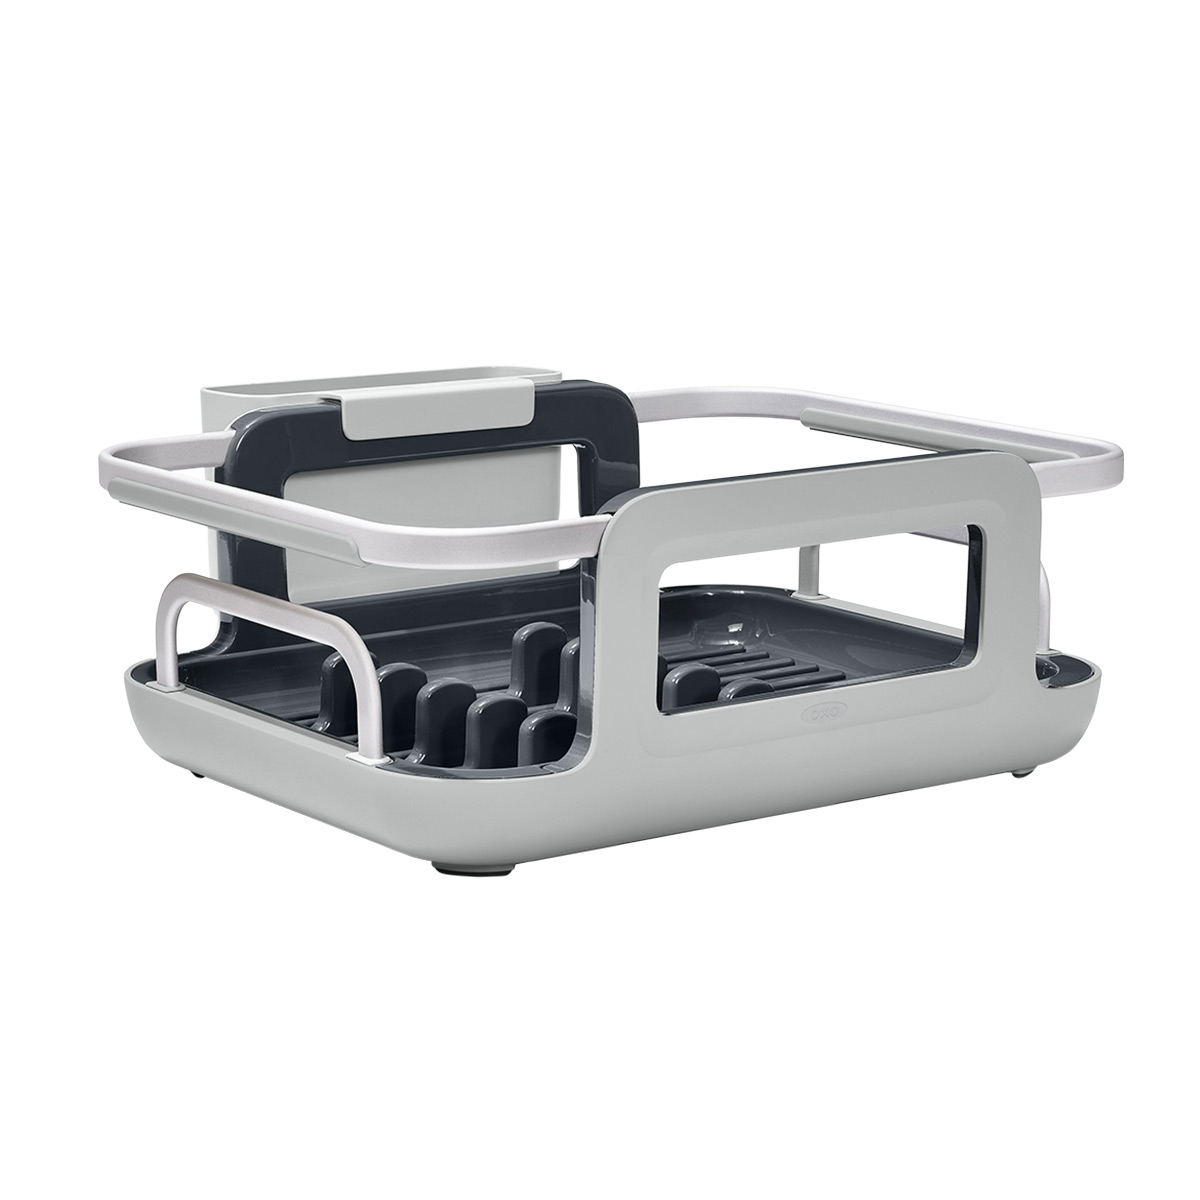 https://www.containerstore.com/catalogimages/476667/10092270-oxo-over-the-sink-dish-rack.jpg